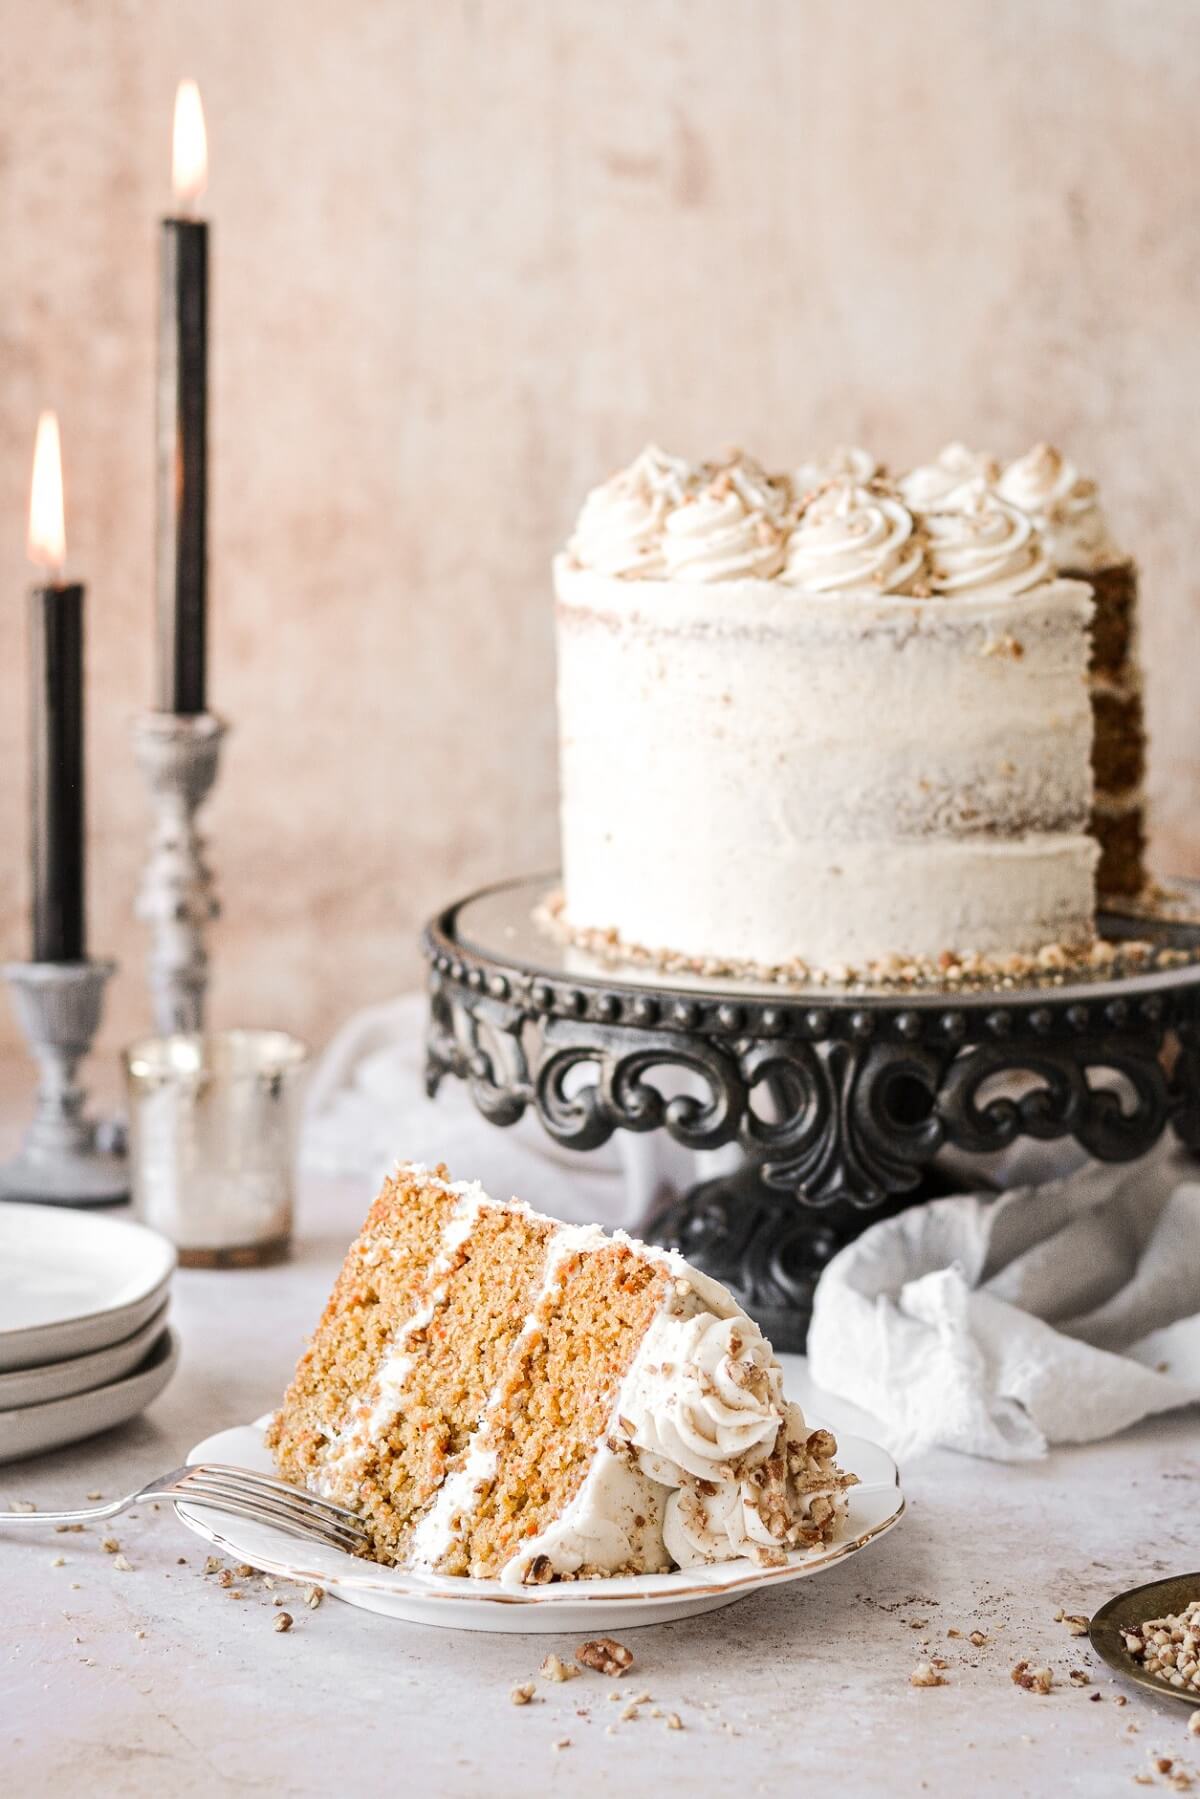 A slice of carrot cake next to a black cake stand and candles.